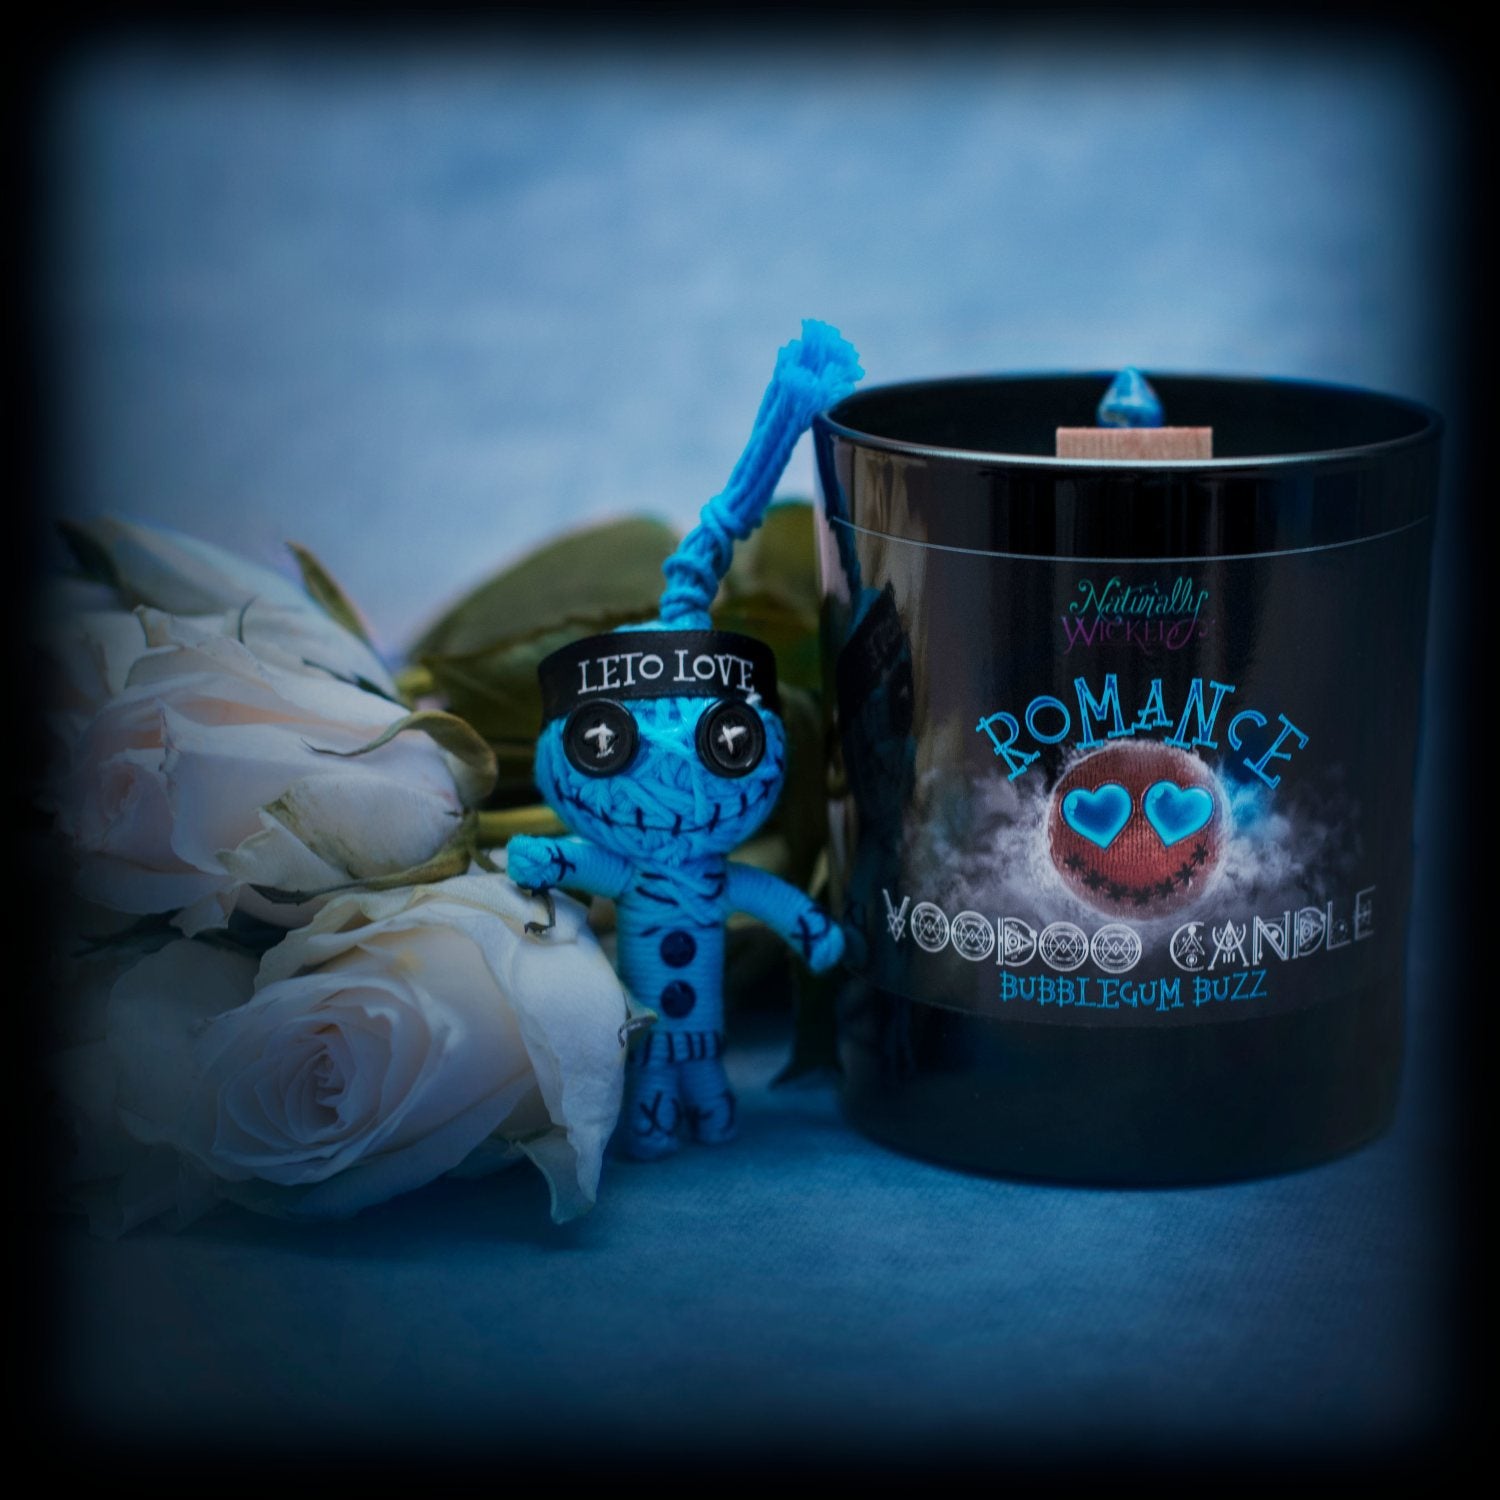 Naturally Wicked Voodoo Romance Crystal Candle Alongside Romance Voodoo Doll; Leto Love